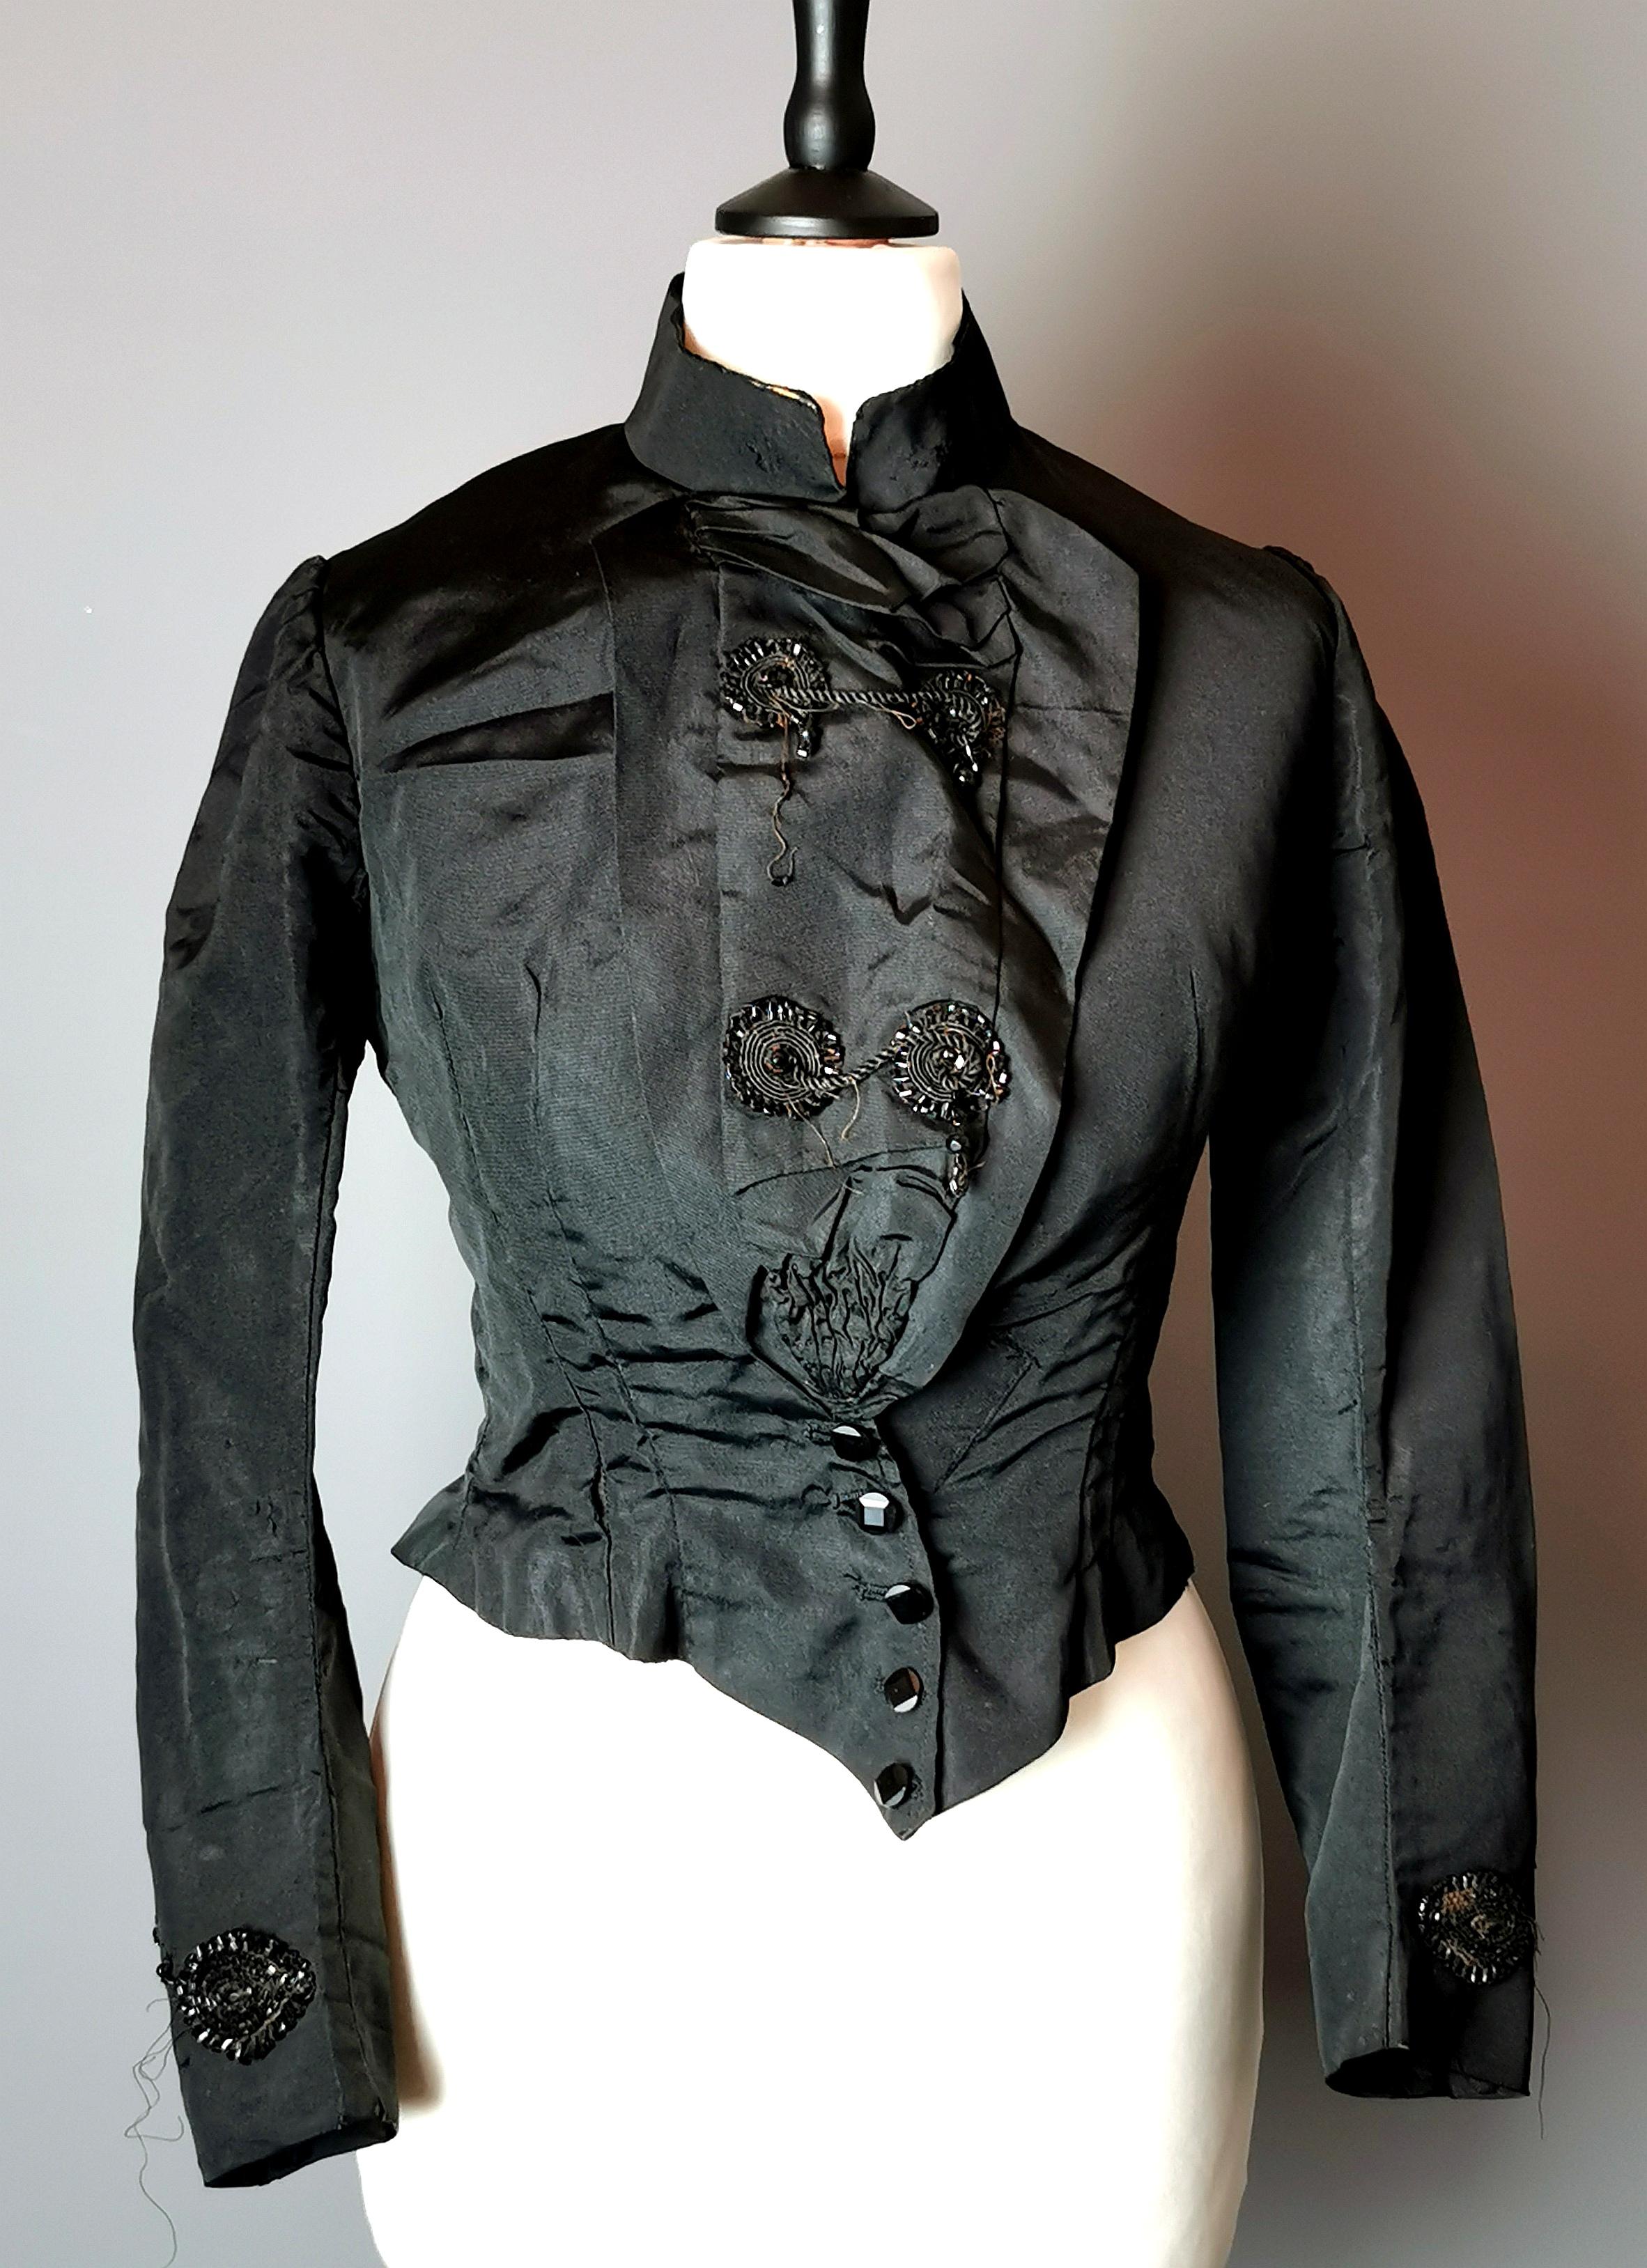 A beautiful antique, Victorian era black silk blend bodice or blouse.

It is a very fitted piece, the waist coming down in a point to the front, high on the hips with a wide pleat fold at the back allowing for a bustle / skirts.

It has a mandarin